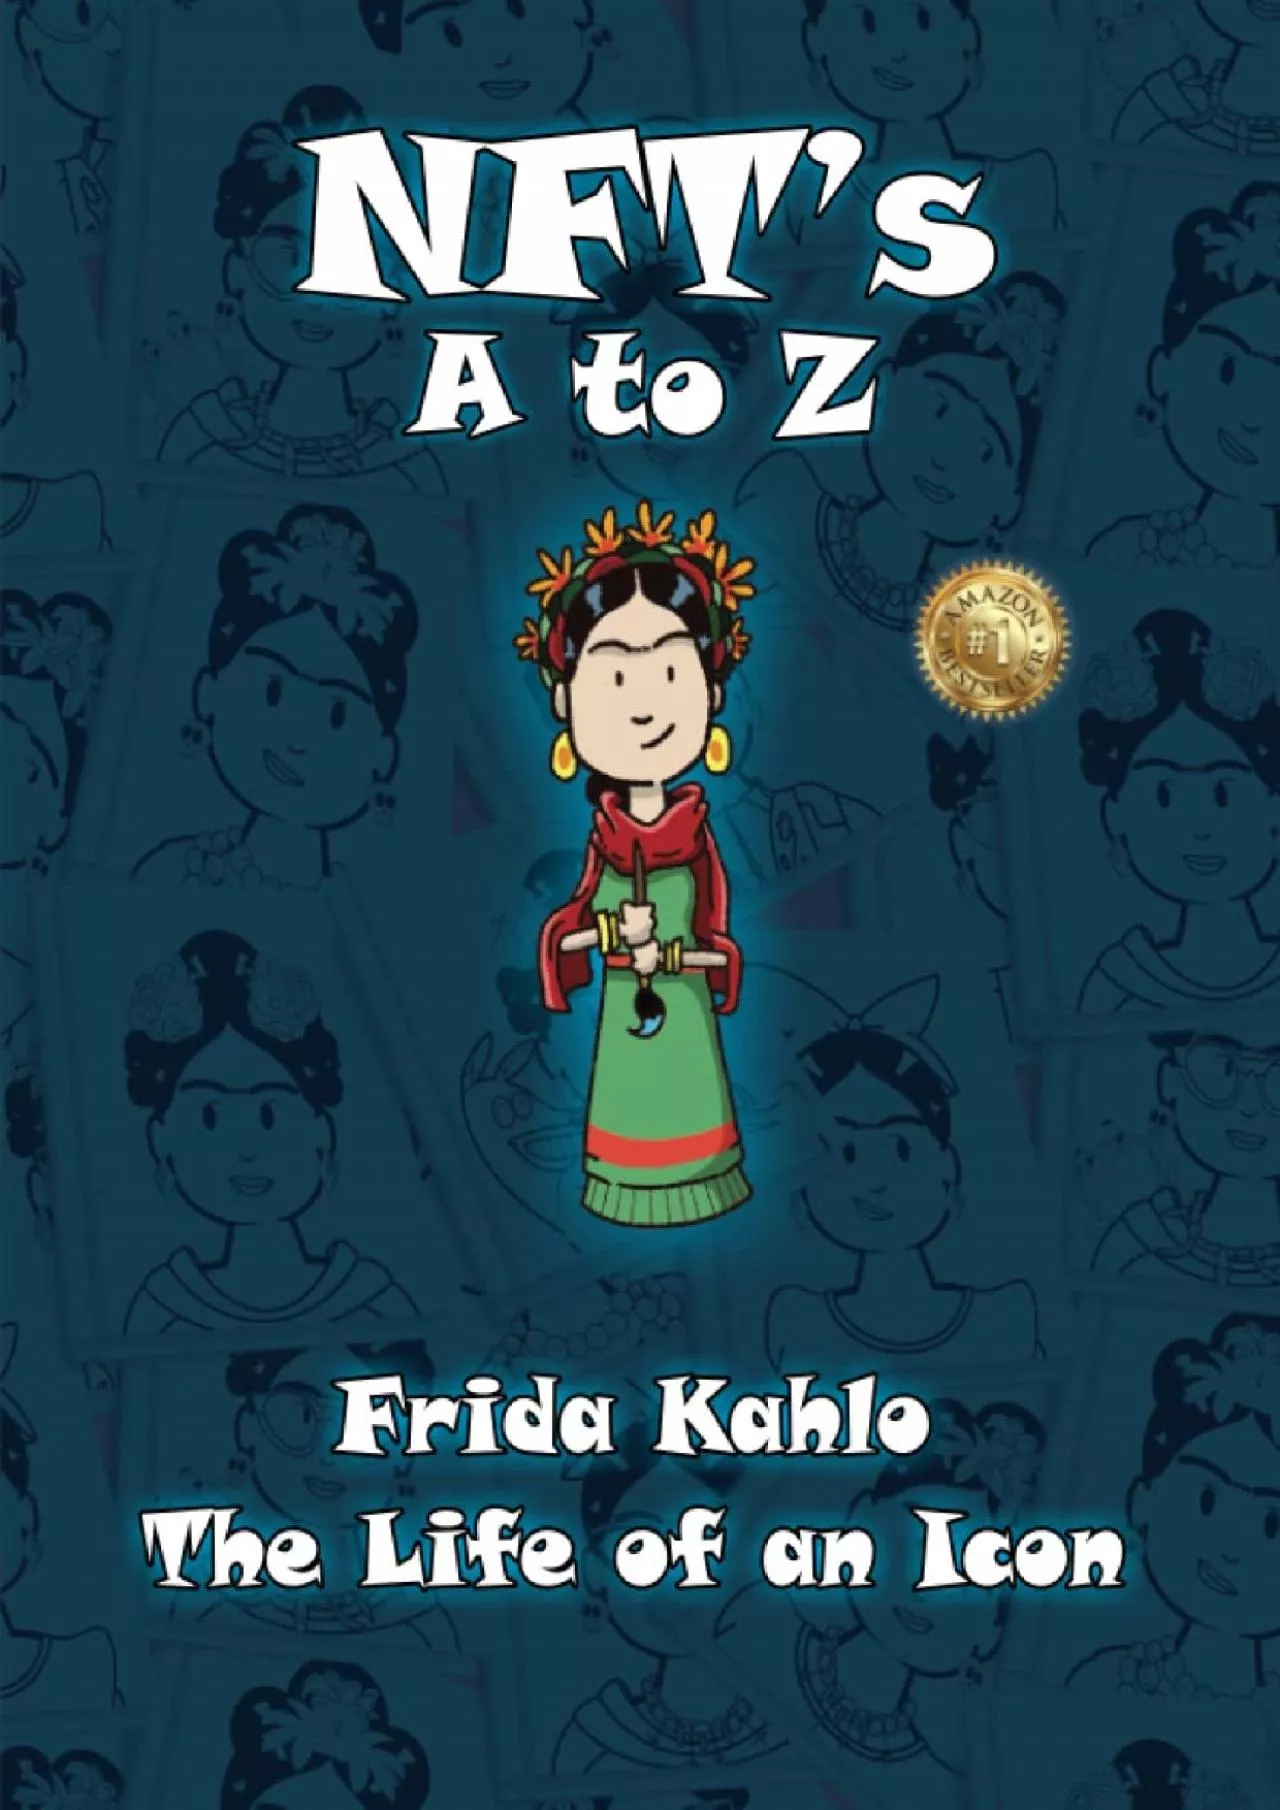 [BEST]-NFT’s A to Z: Frida Kahlo The Life of an Icon